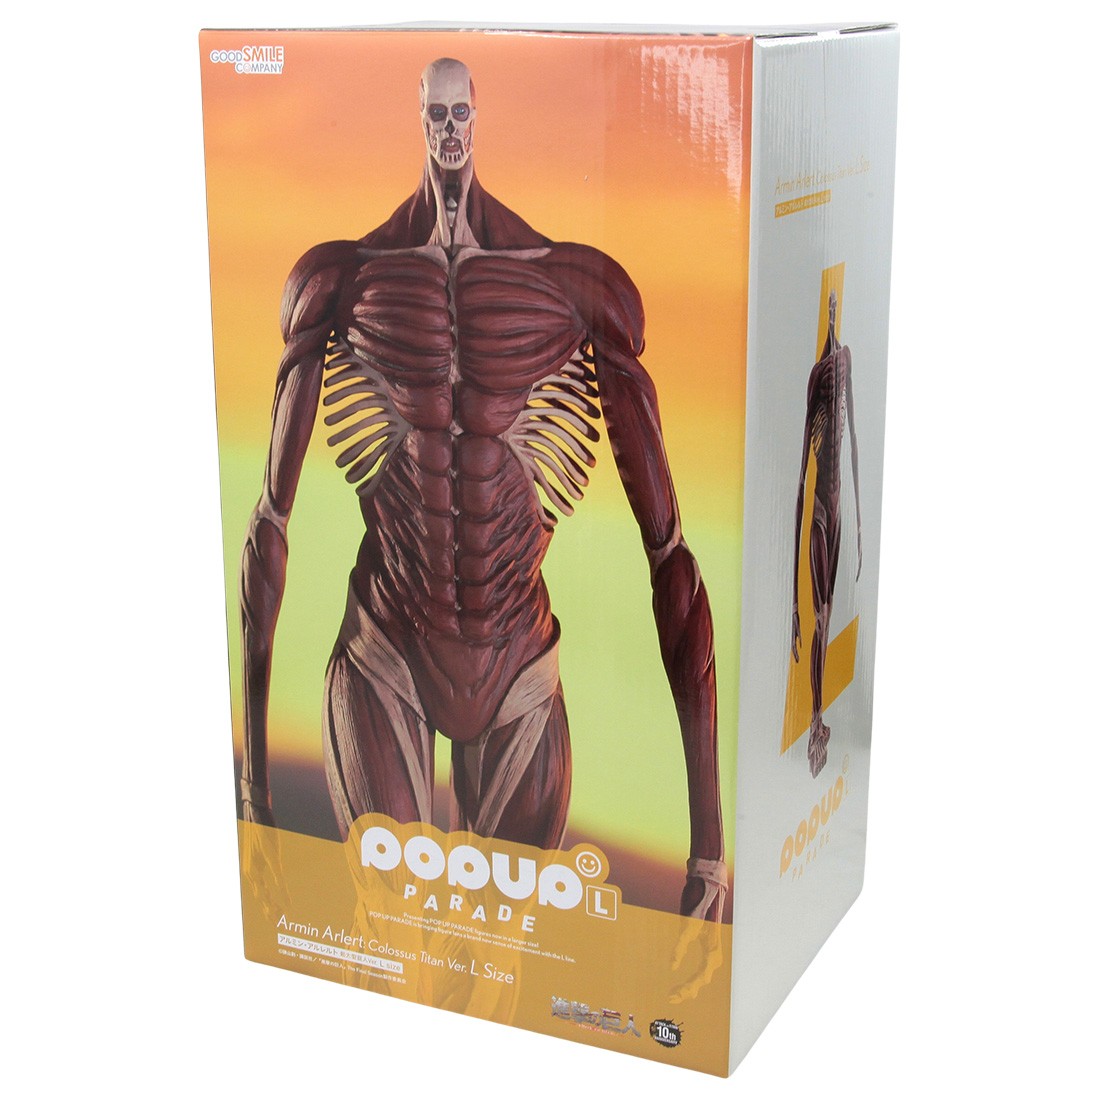 ⭐️ [𝗣𝗿𝗲-𝗼𝗿𝗱𝗲𝗿] Good Smile Company POP UP PARADE Statue Fixed Pose  Figure - Attack on Titan 